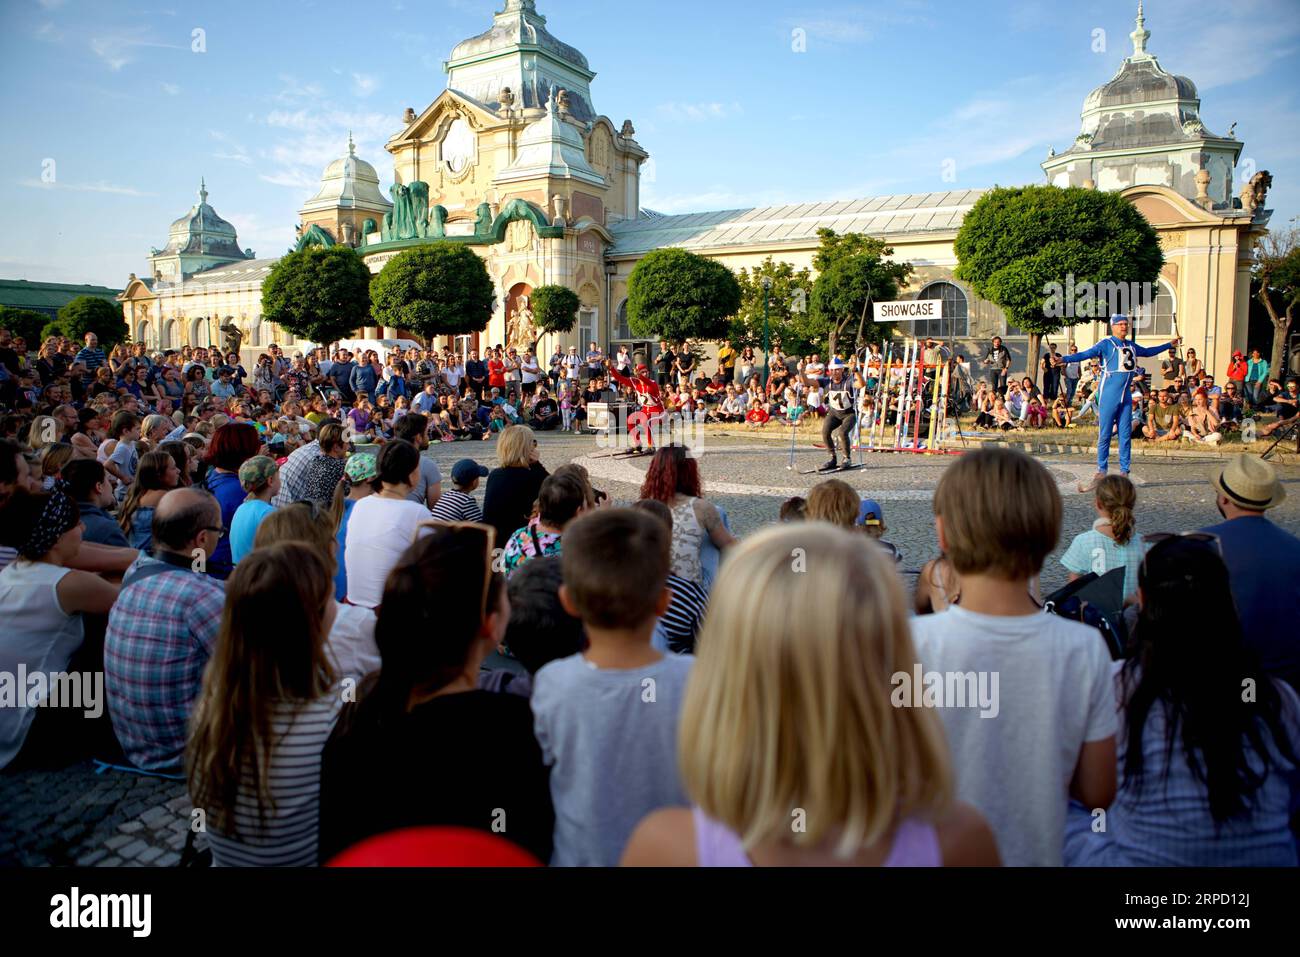 (190718) -- PRAGUE, July 18, 2019 (Xinhua) -- People watch a performance during the 11th Prague International Street Theatre Festival in Prague, the Czech Republic, July 17, 2019. The four-day festival closed Thursday in the Czech capital. Artists from seven European countries staged more than 30 performances for the city s residents and visitors. (Xinhua/Dana Kesnerova) CZECH REPUBLIC-PRAGUE-THEATRE-FESTIVAL PUBLICATIONxNOTxINxCHN Stock Photo